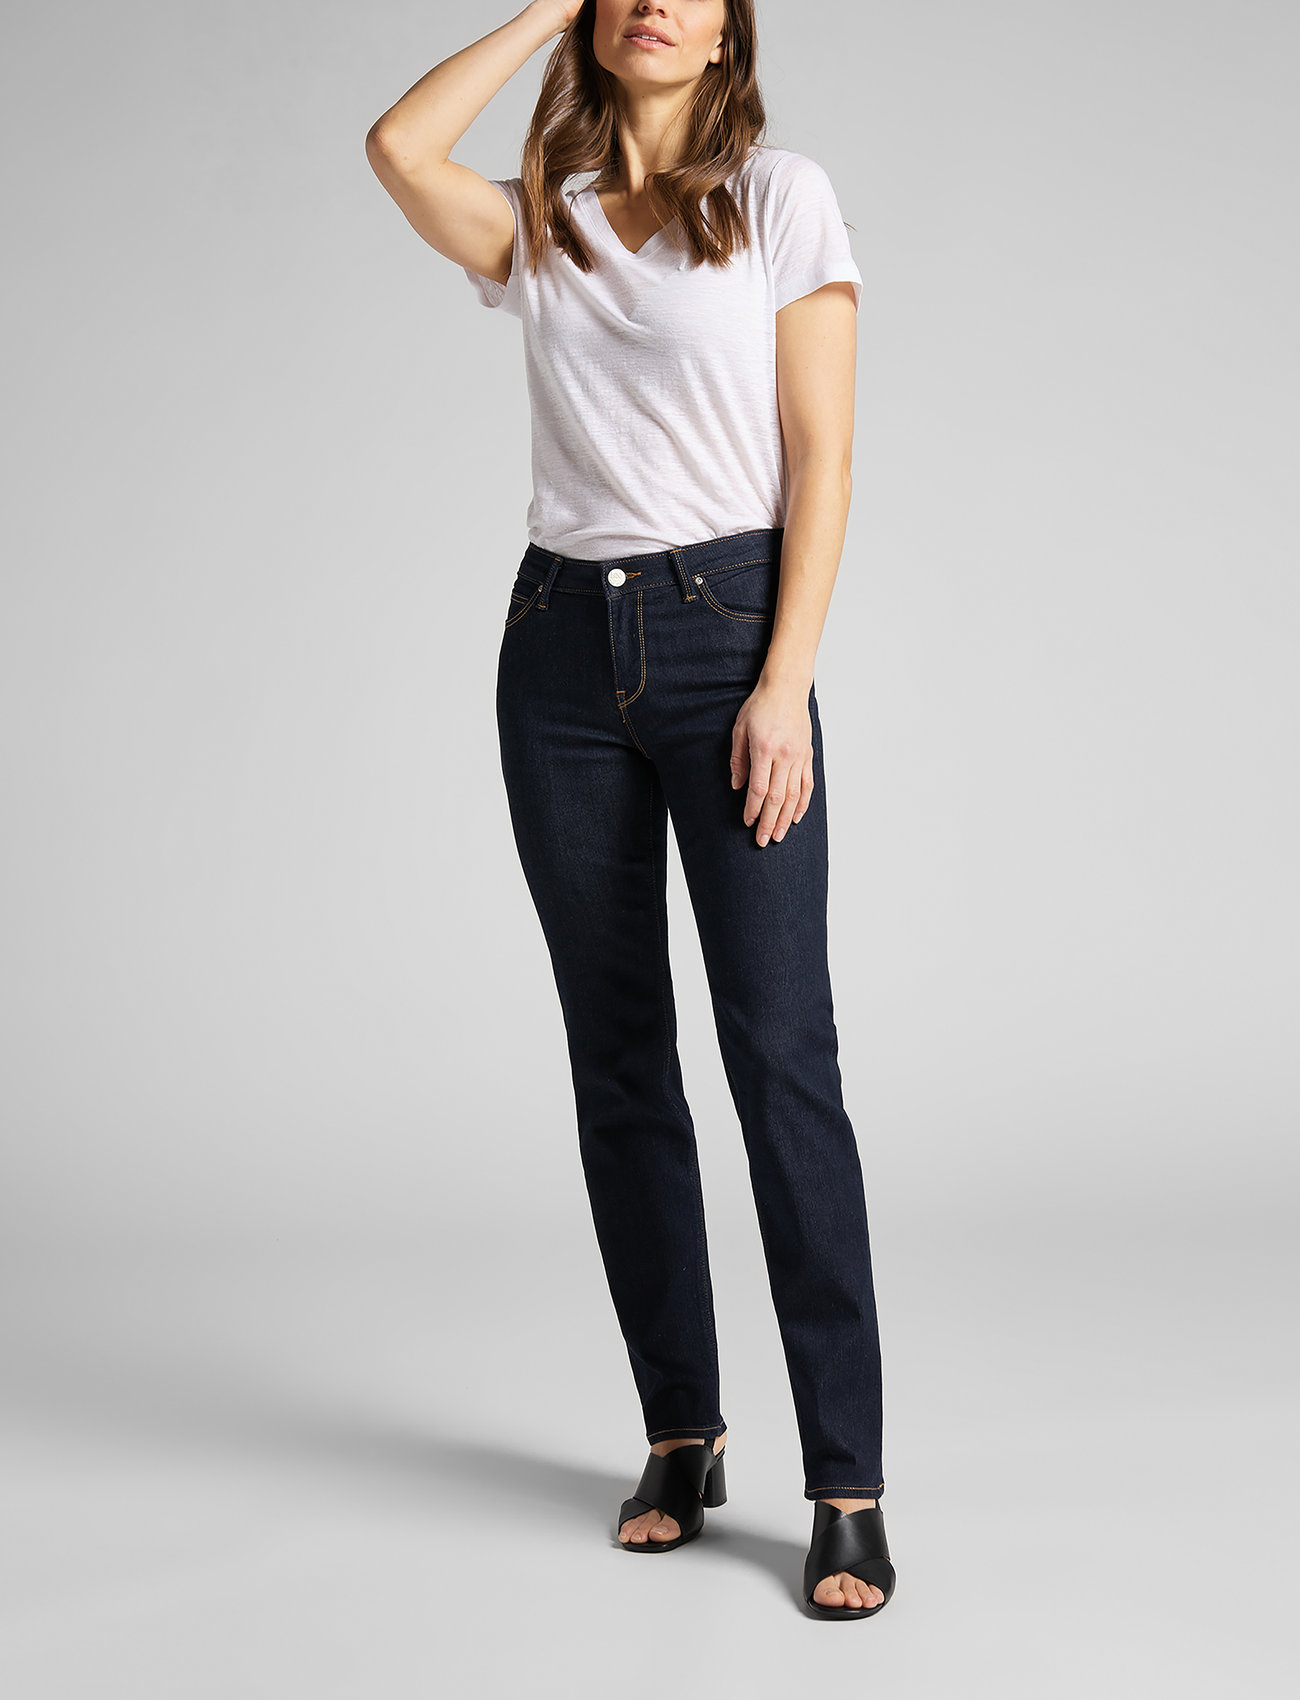 Lee Jeans - MARION STRAIGHT - straight jeans - rinse - 0